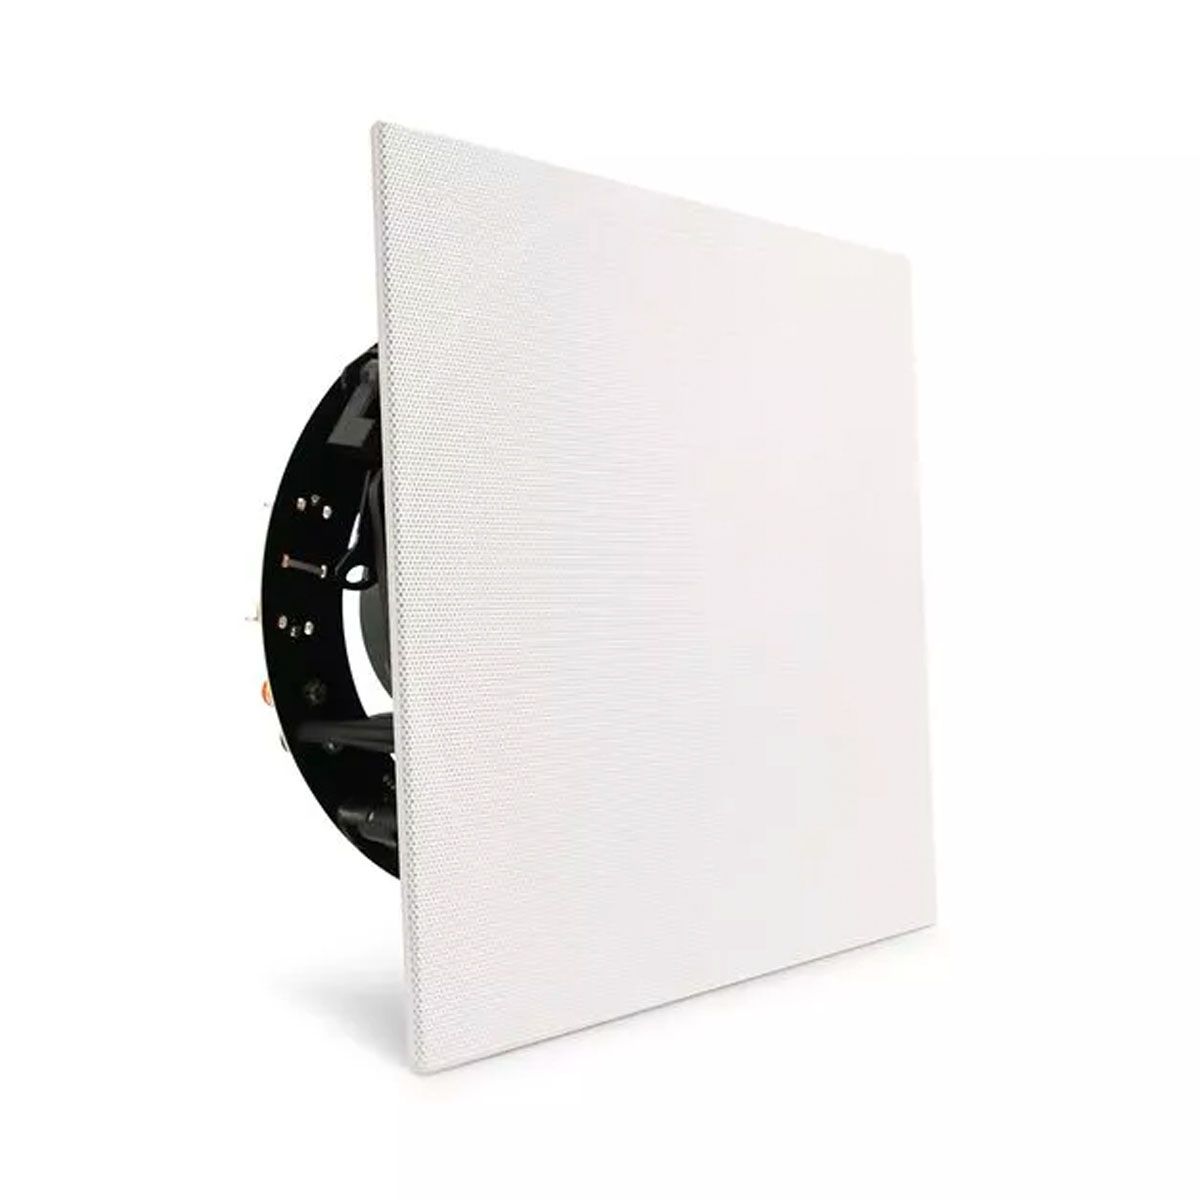 Revel C583 In-Ceiling Speaker - White - Each - with square grille